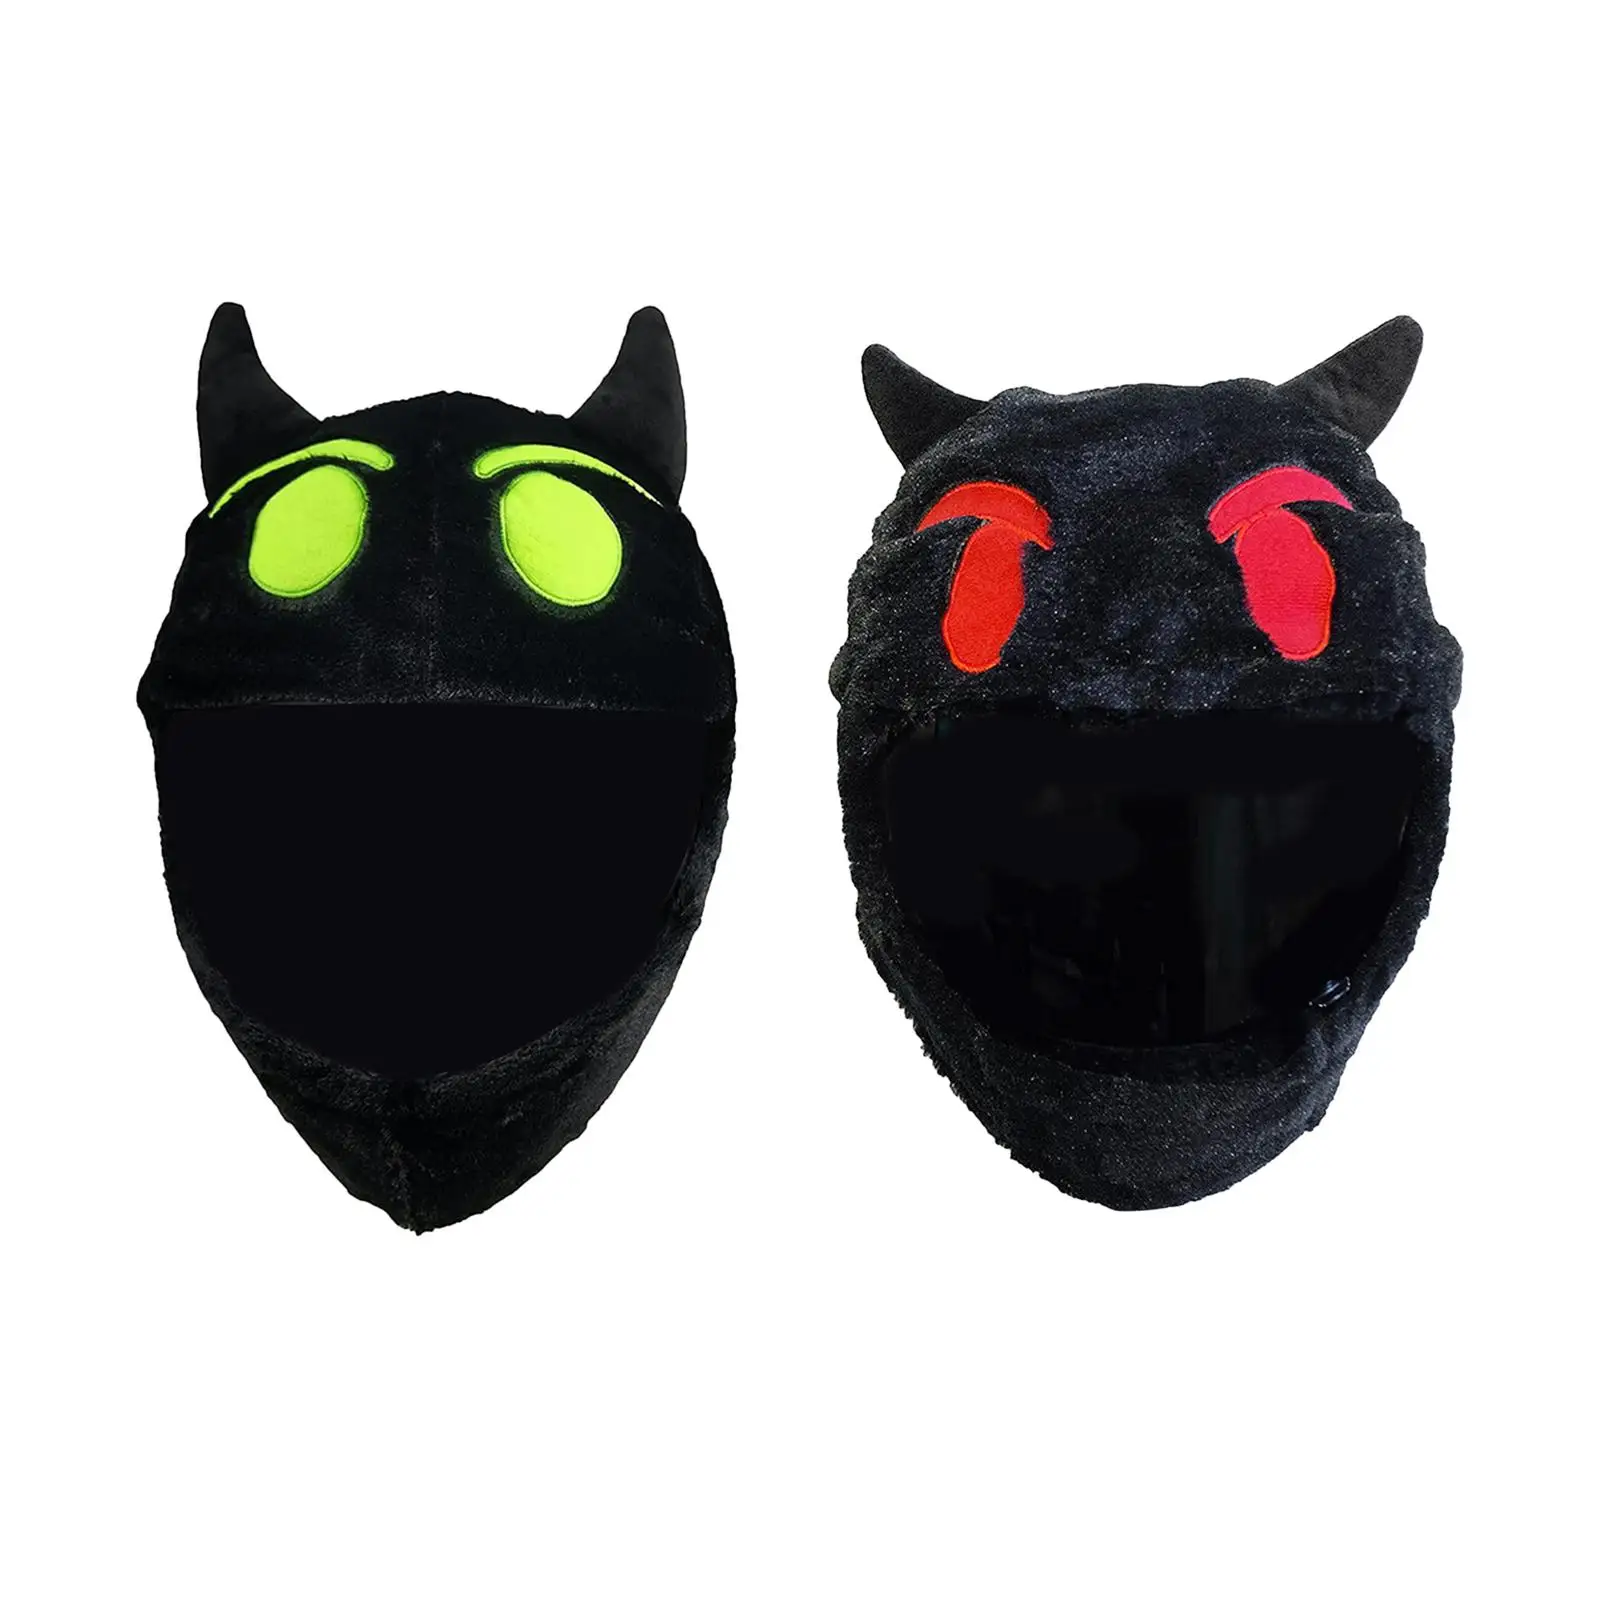 Devil Helmet Cover Plush Helmet Cover Cute Decoration Easy to Install Eye Catching Style Gifts Increase Riding Fun